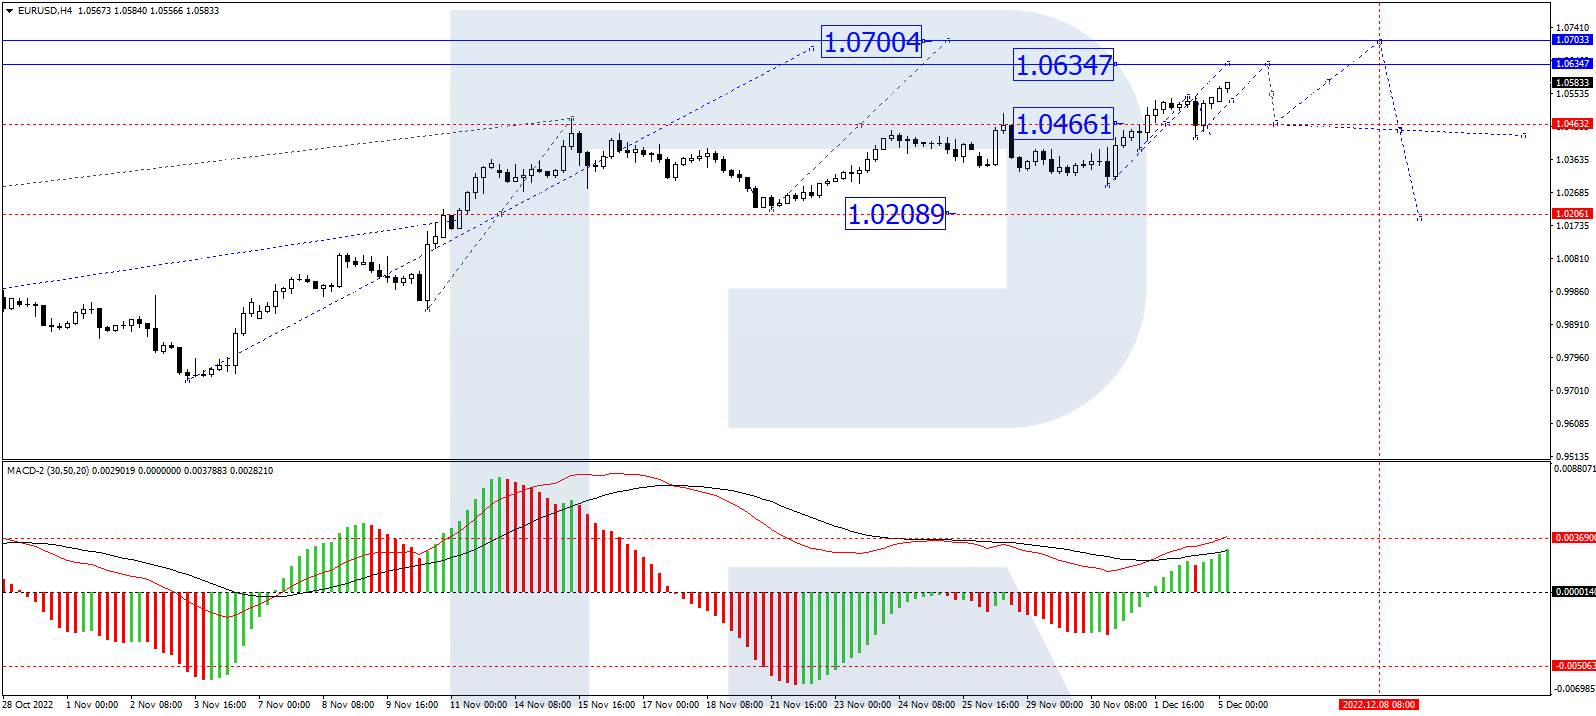 On H4, the currency pair has formed a consolidation range around 1.0466